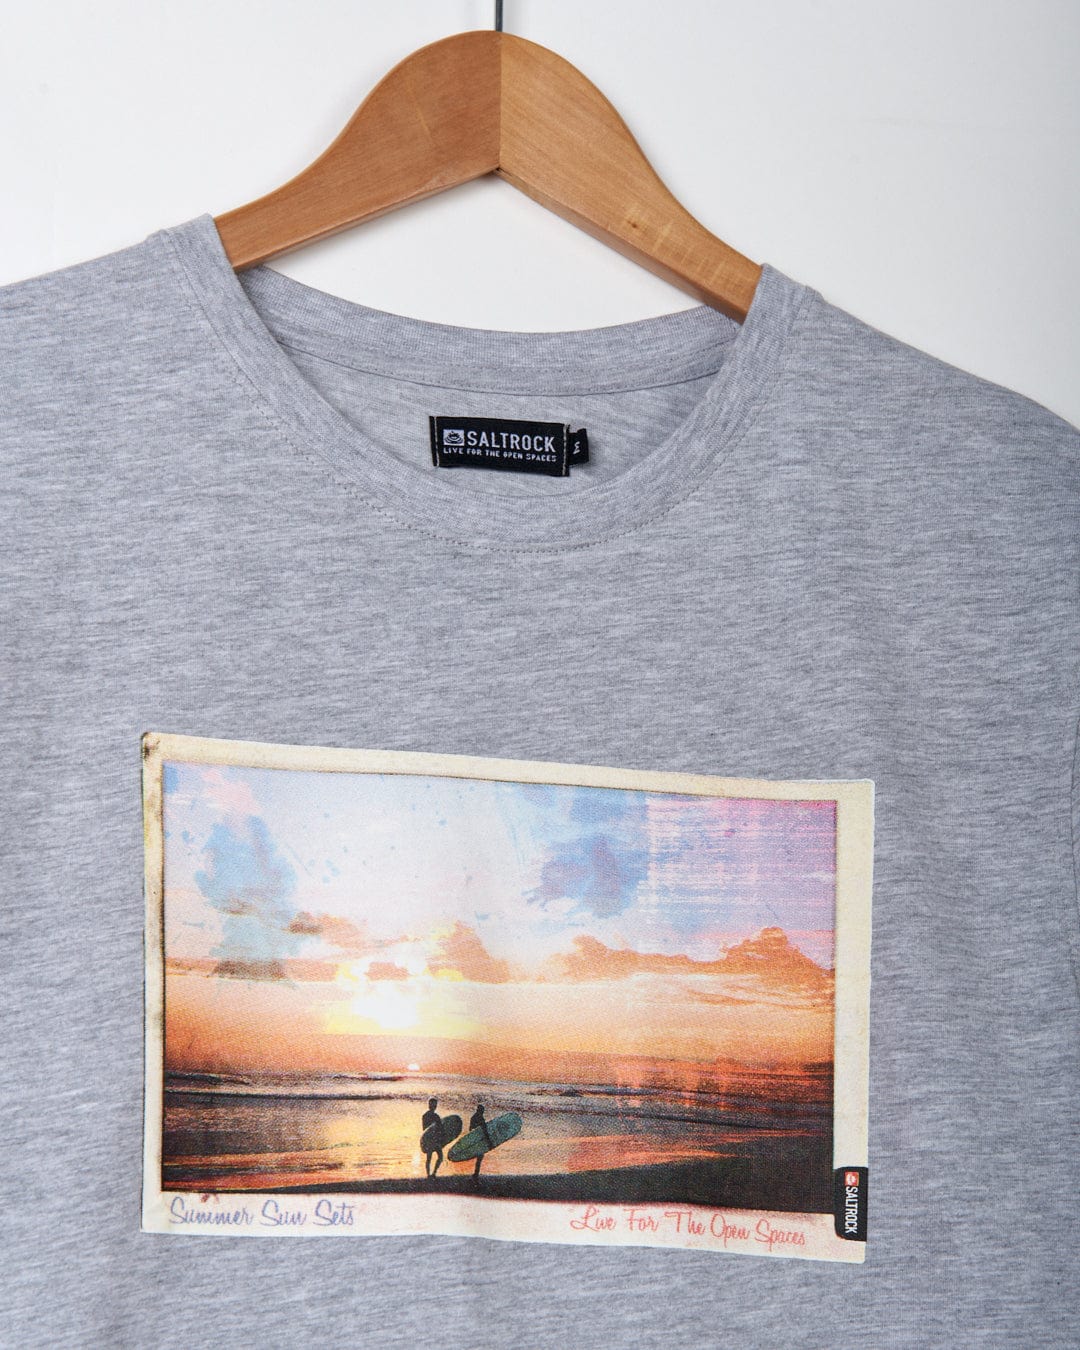 A Grey Marl Sun Sets - Mens Short Sleeve T-Shirt featuring a sunset digital print on the front by Saltrock.